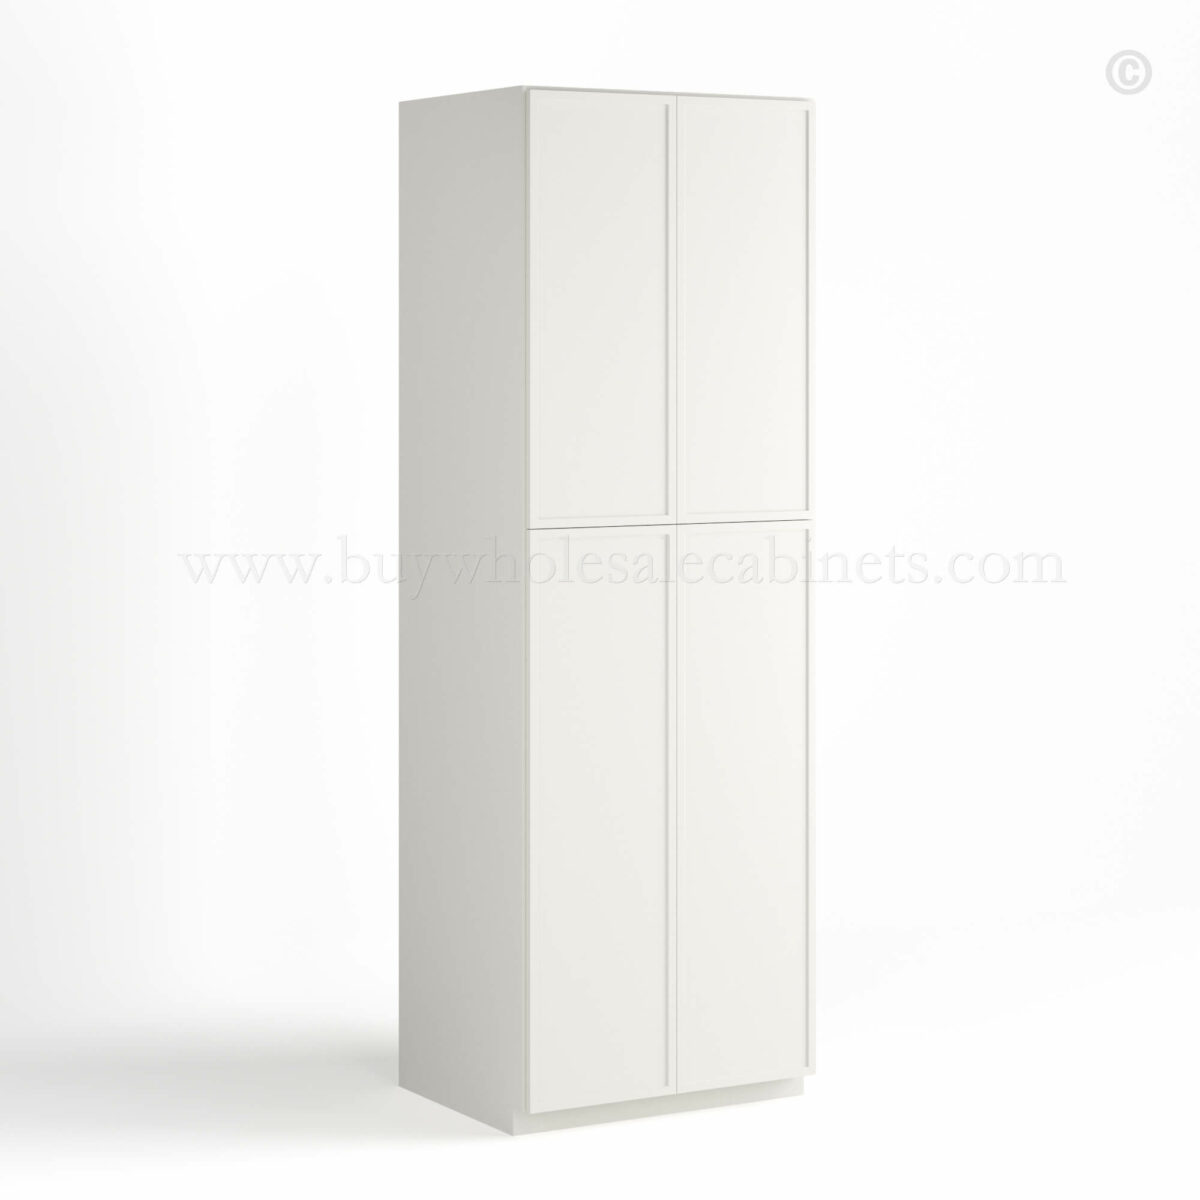 slim shaker cabinets, Dove White Slim Shaker Tall Pantry Cabinet with 4 Doors